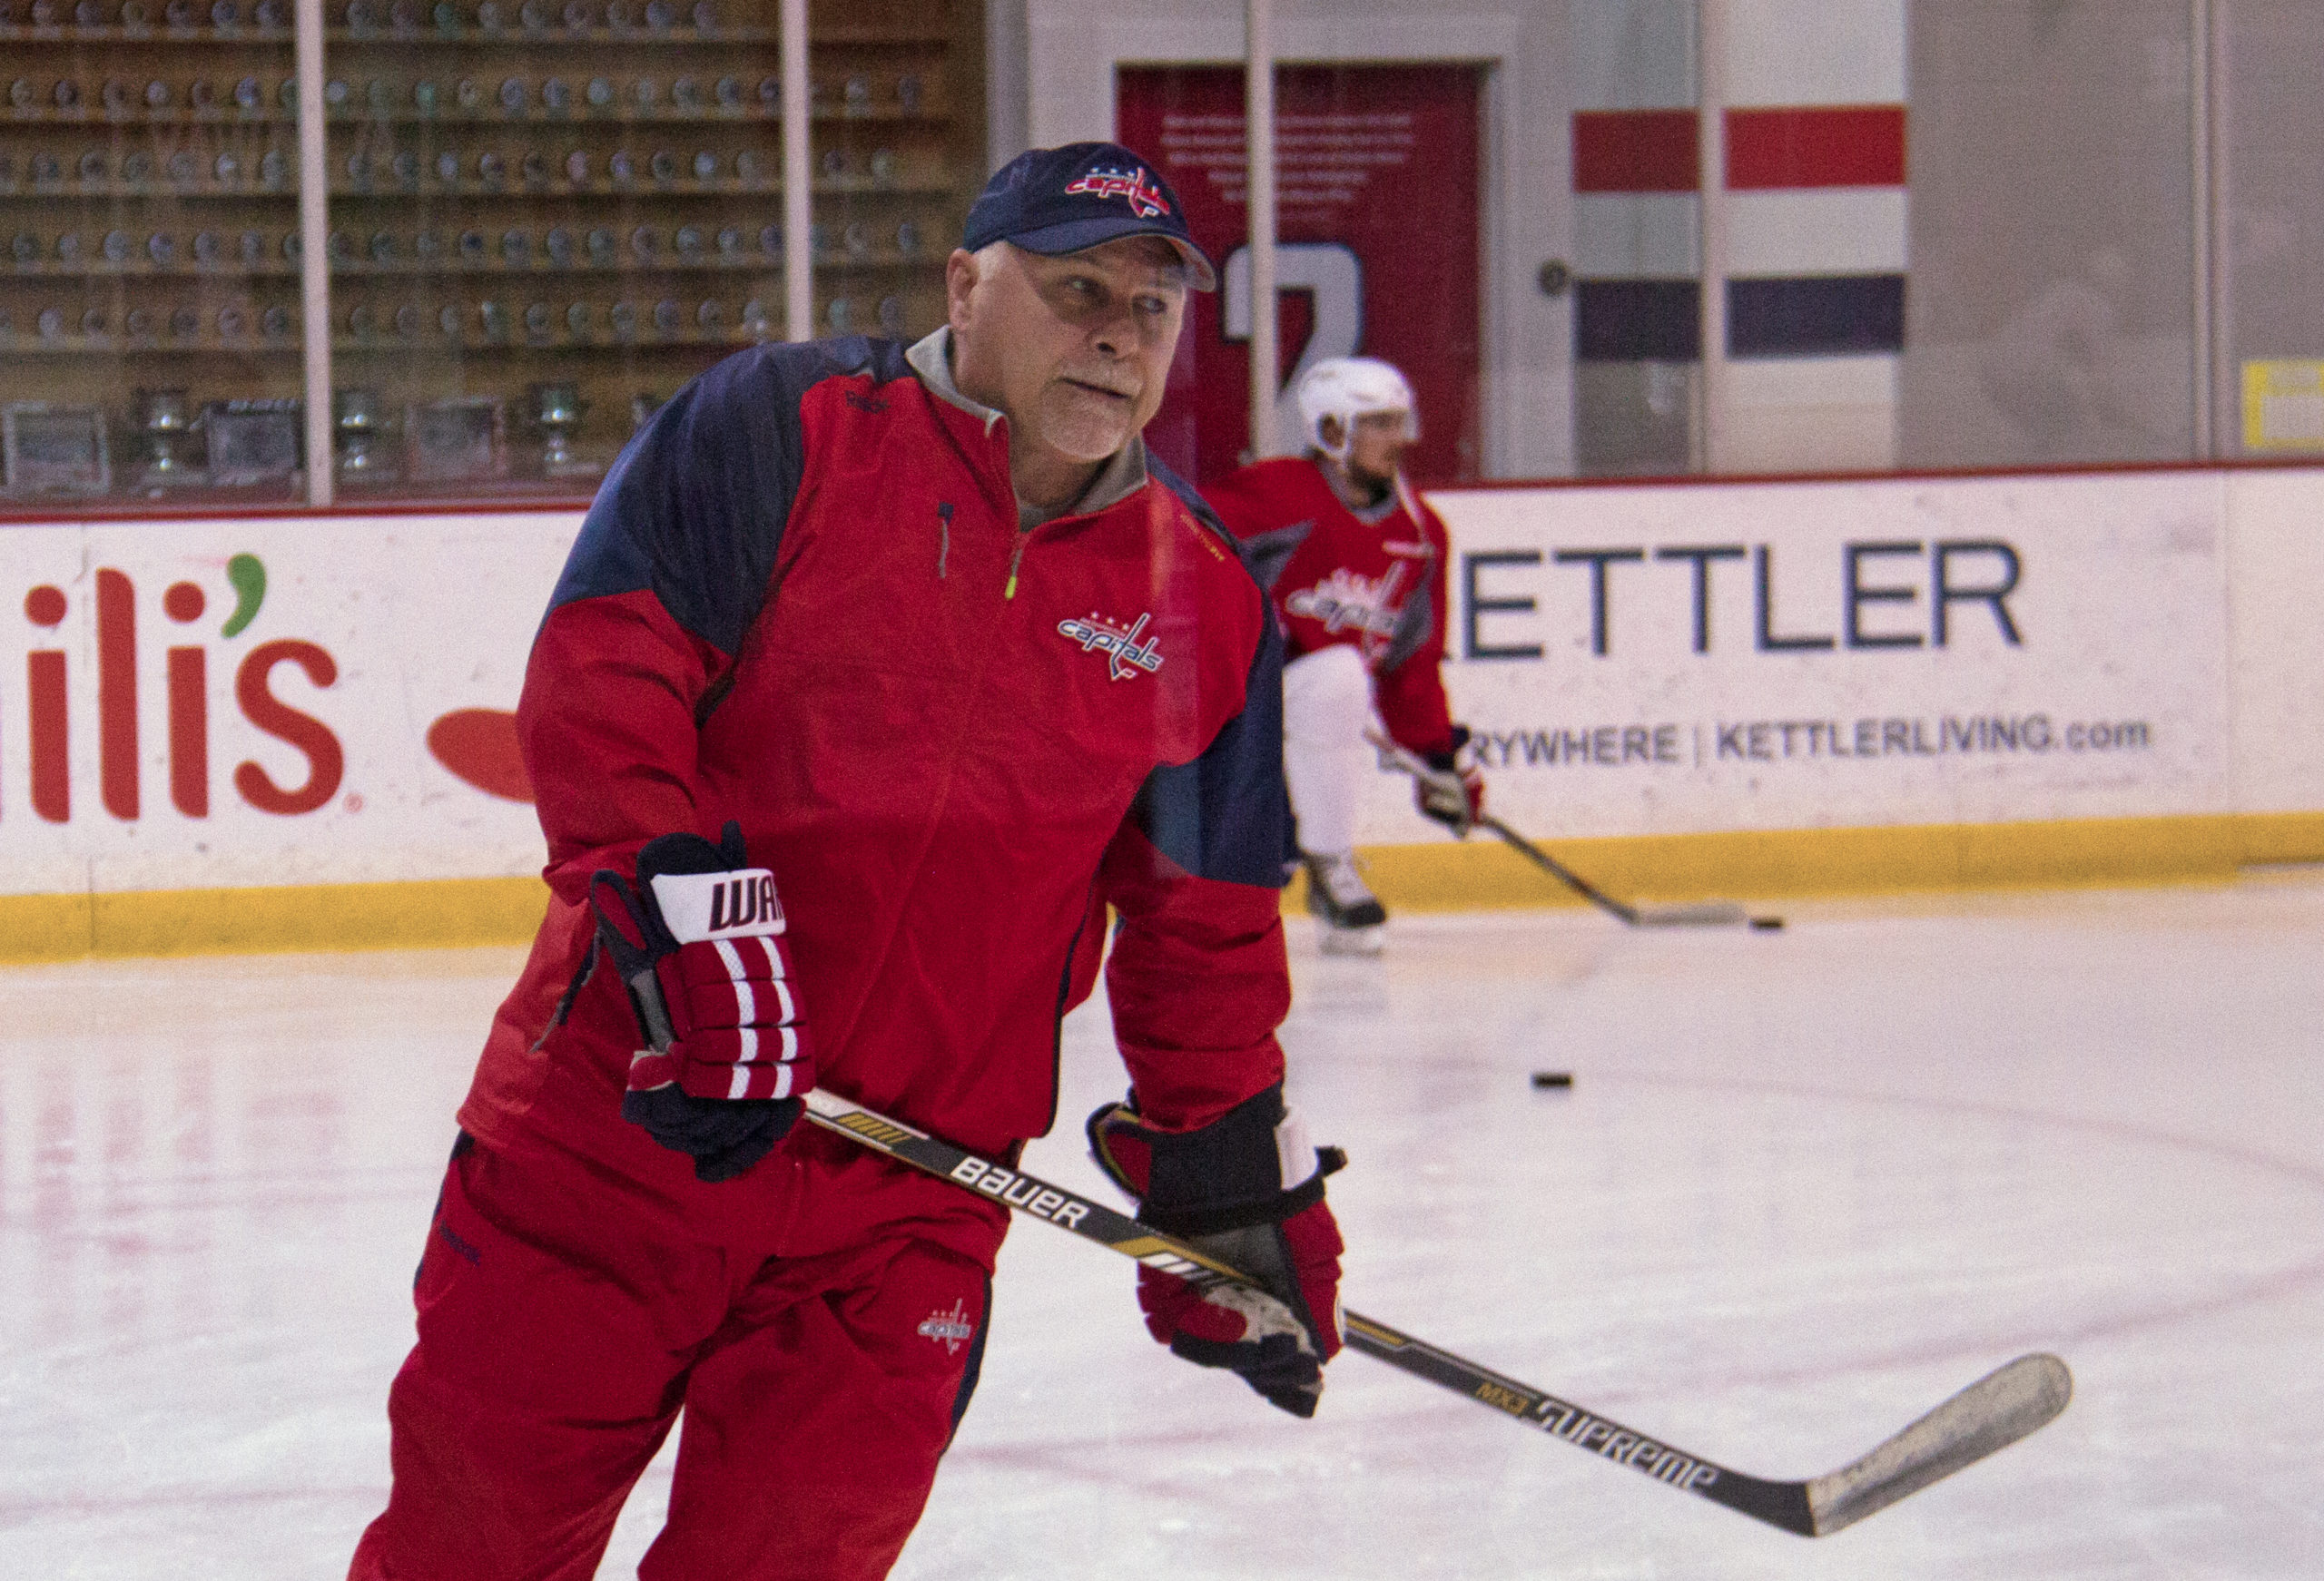 Former Capitals bench boss Barry Trotz